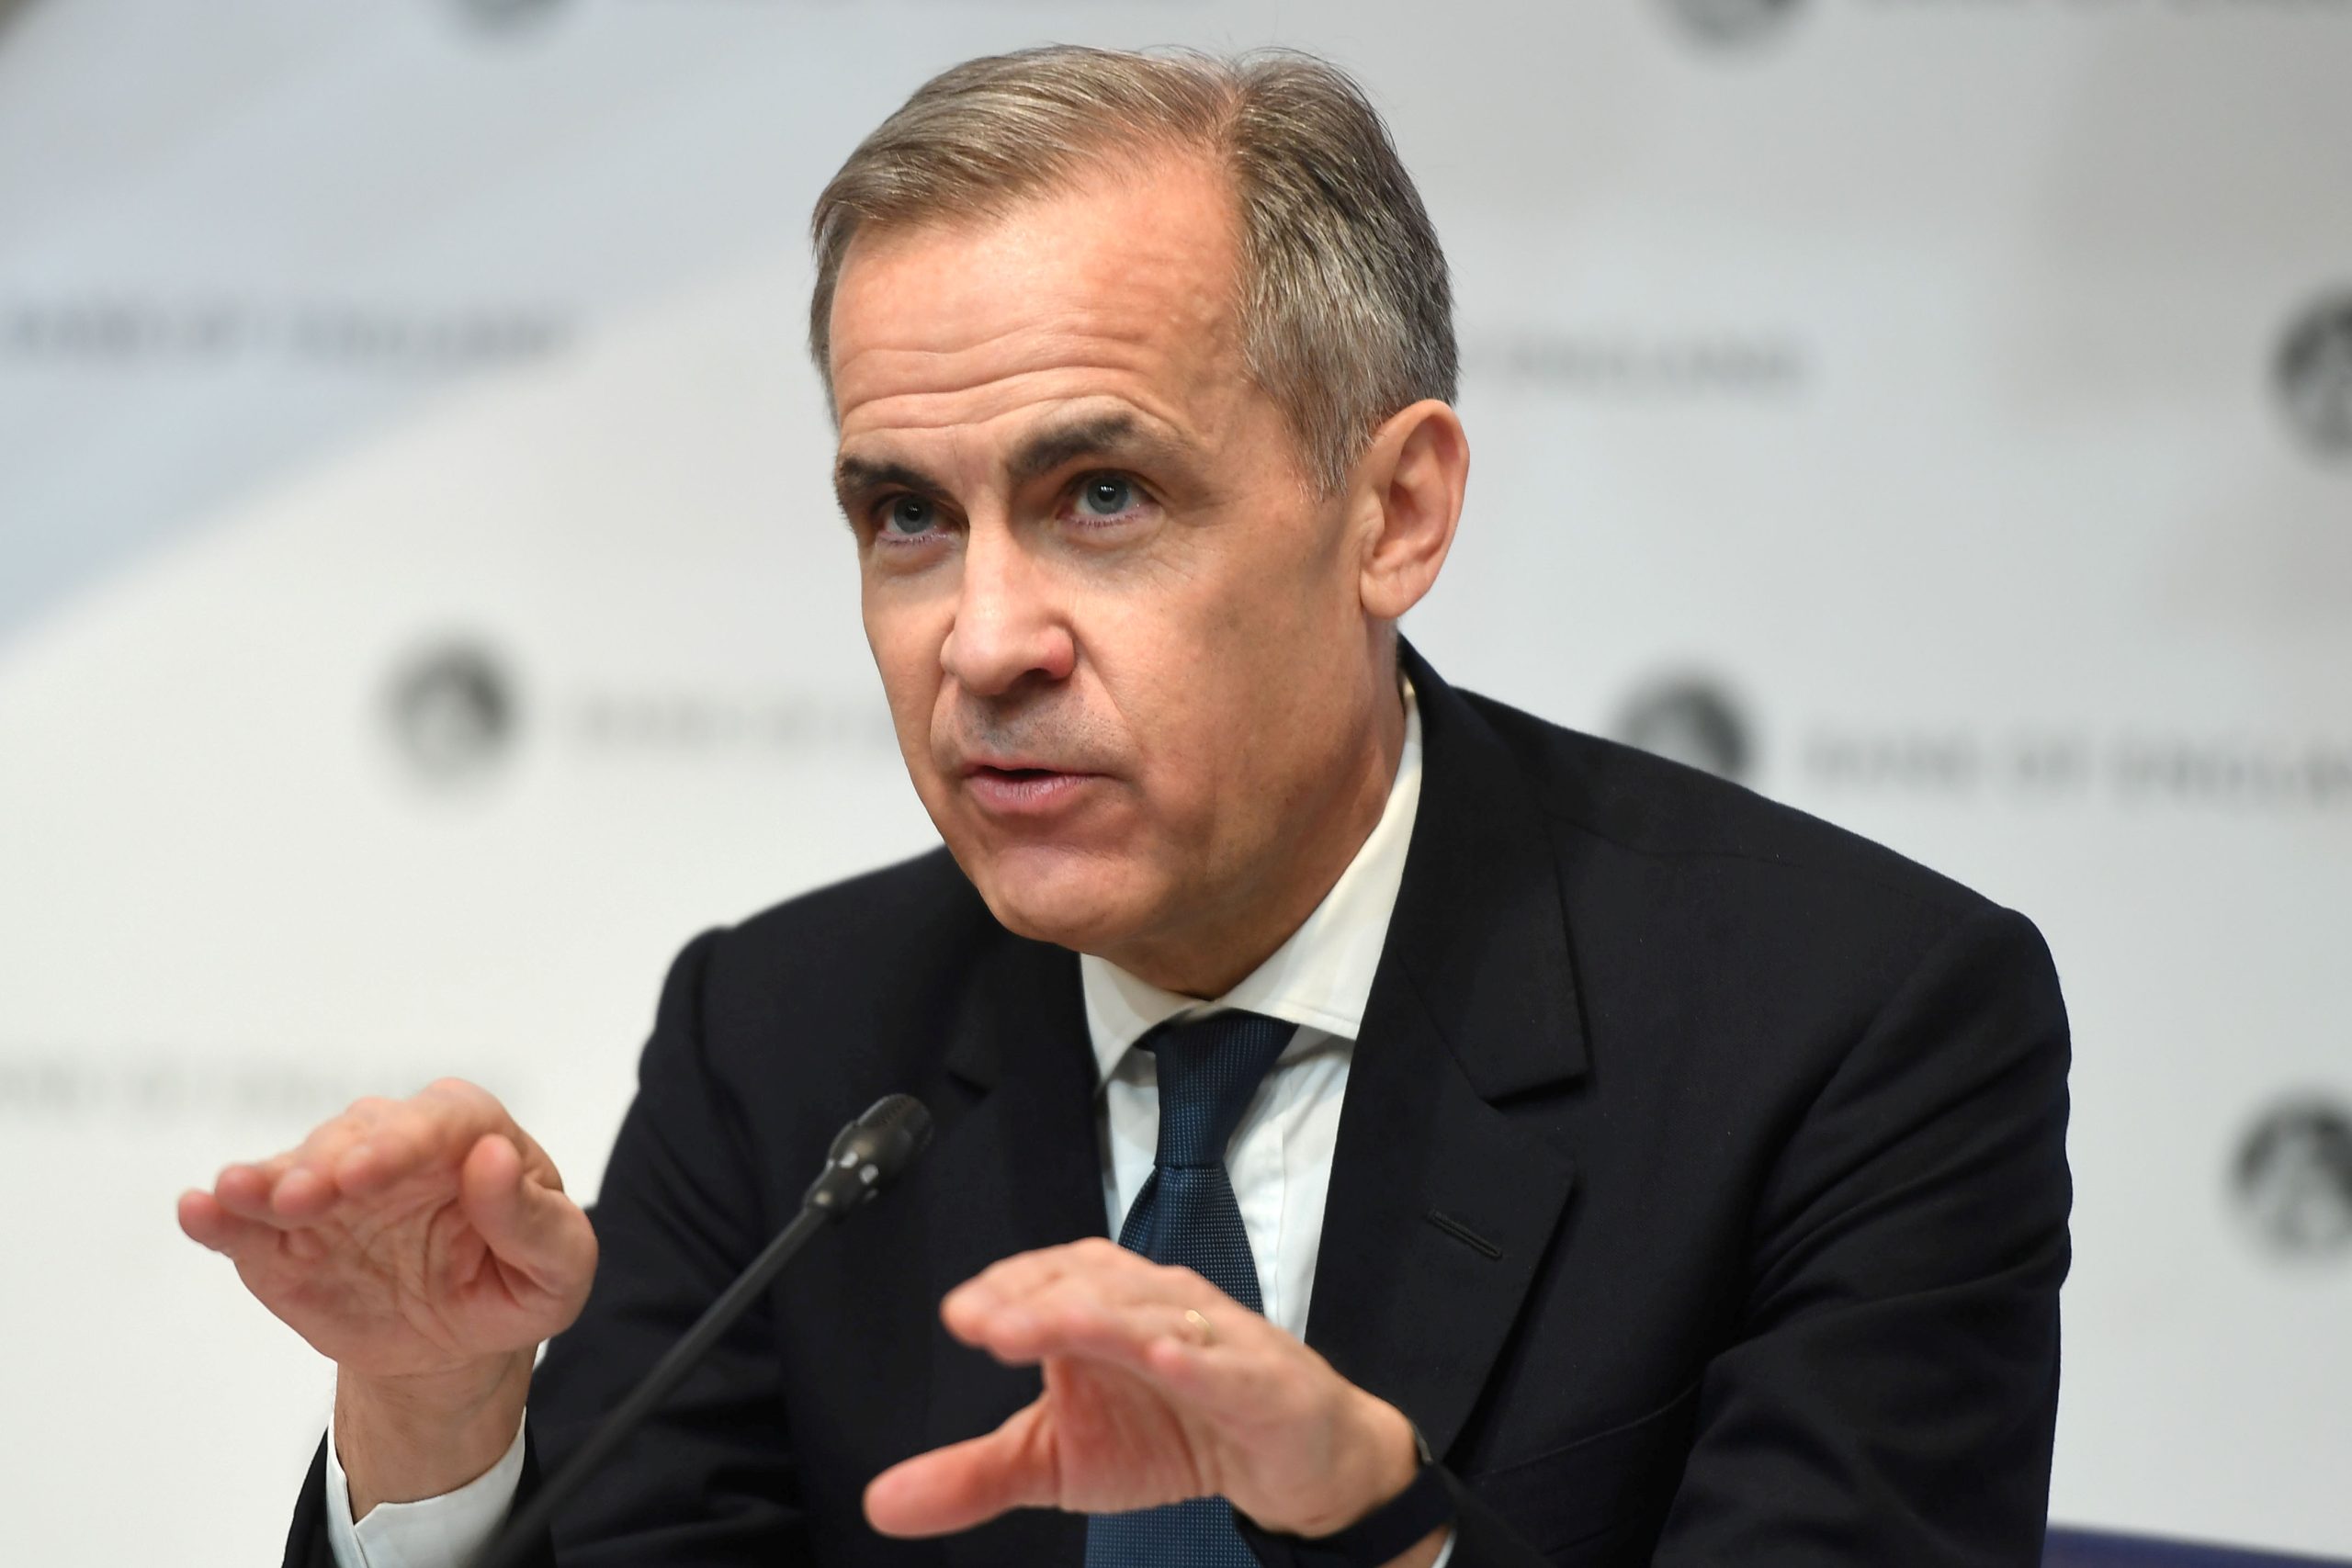 MARK CARNEY SAYS FISCAL DISCIPLINE ‘IMPERATIVE’ TO COMBAT GLOBAL INFLATION, STABILITY